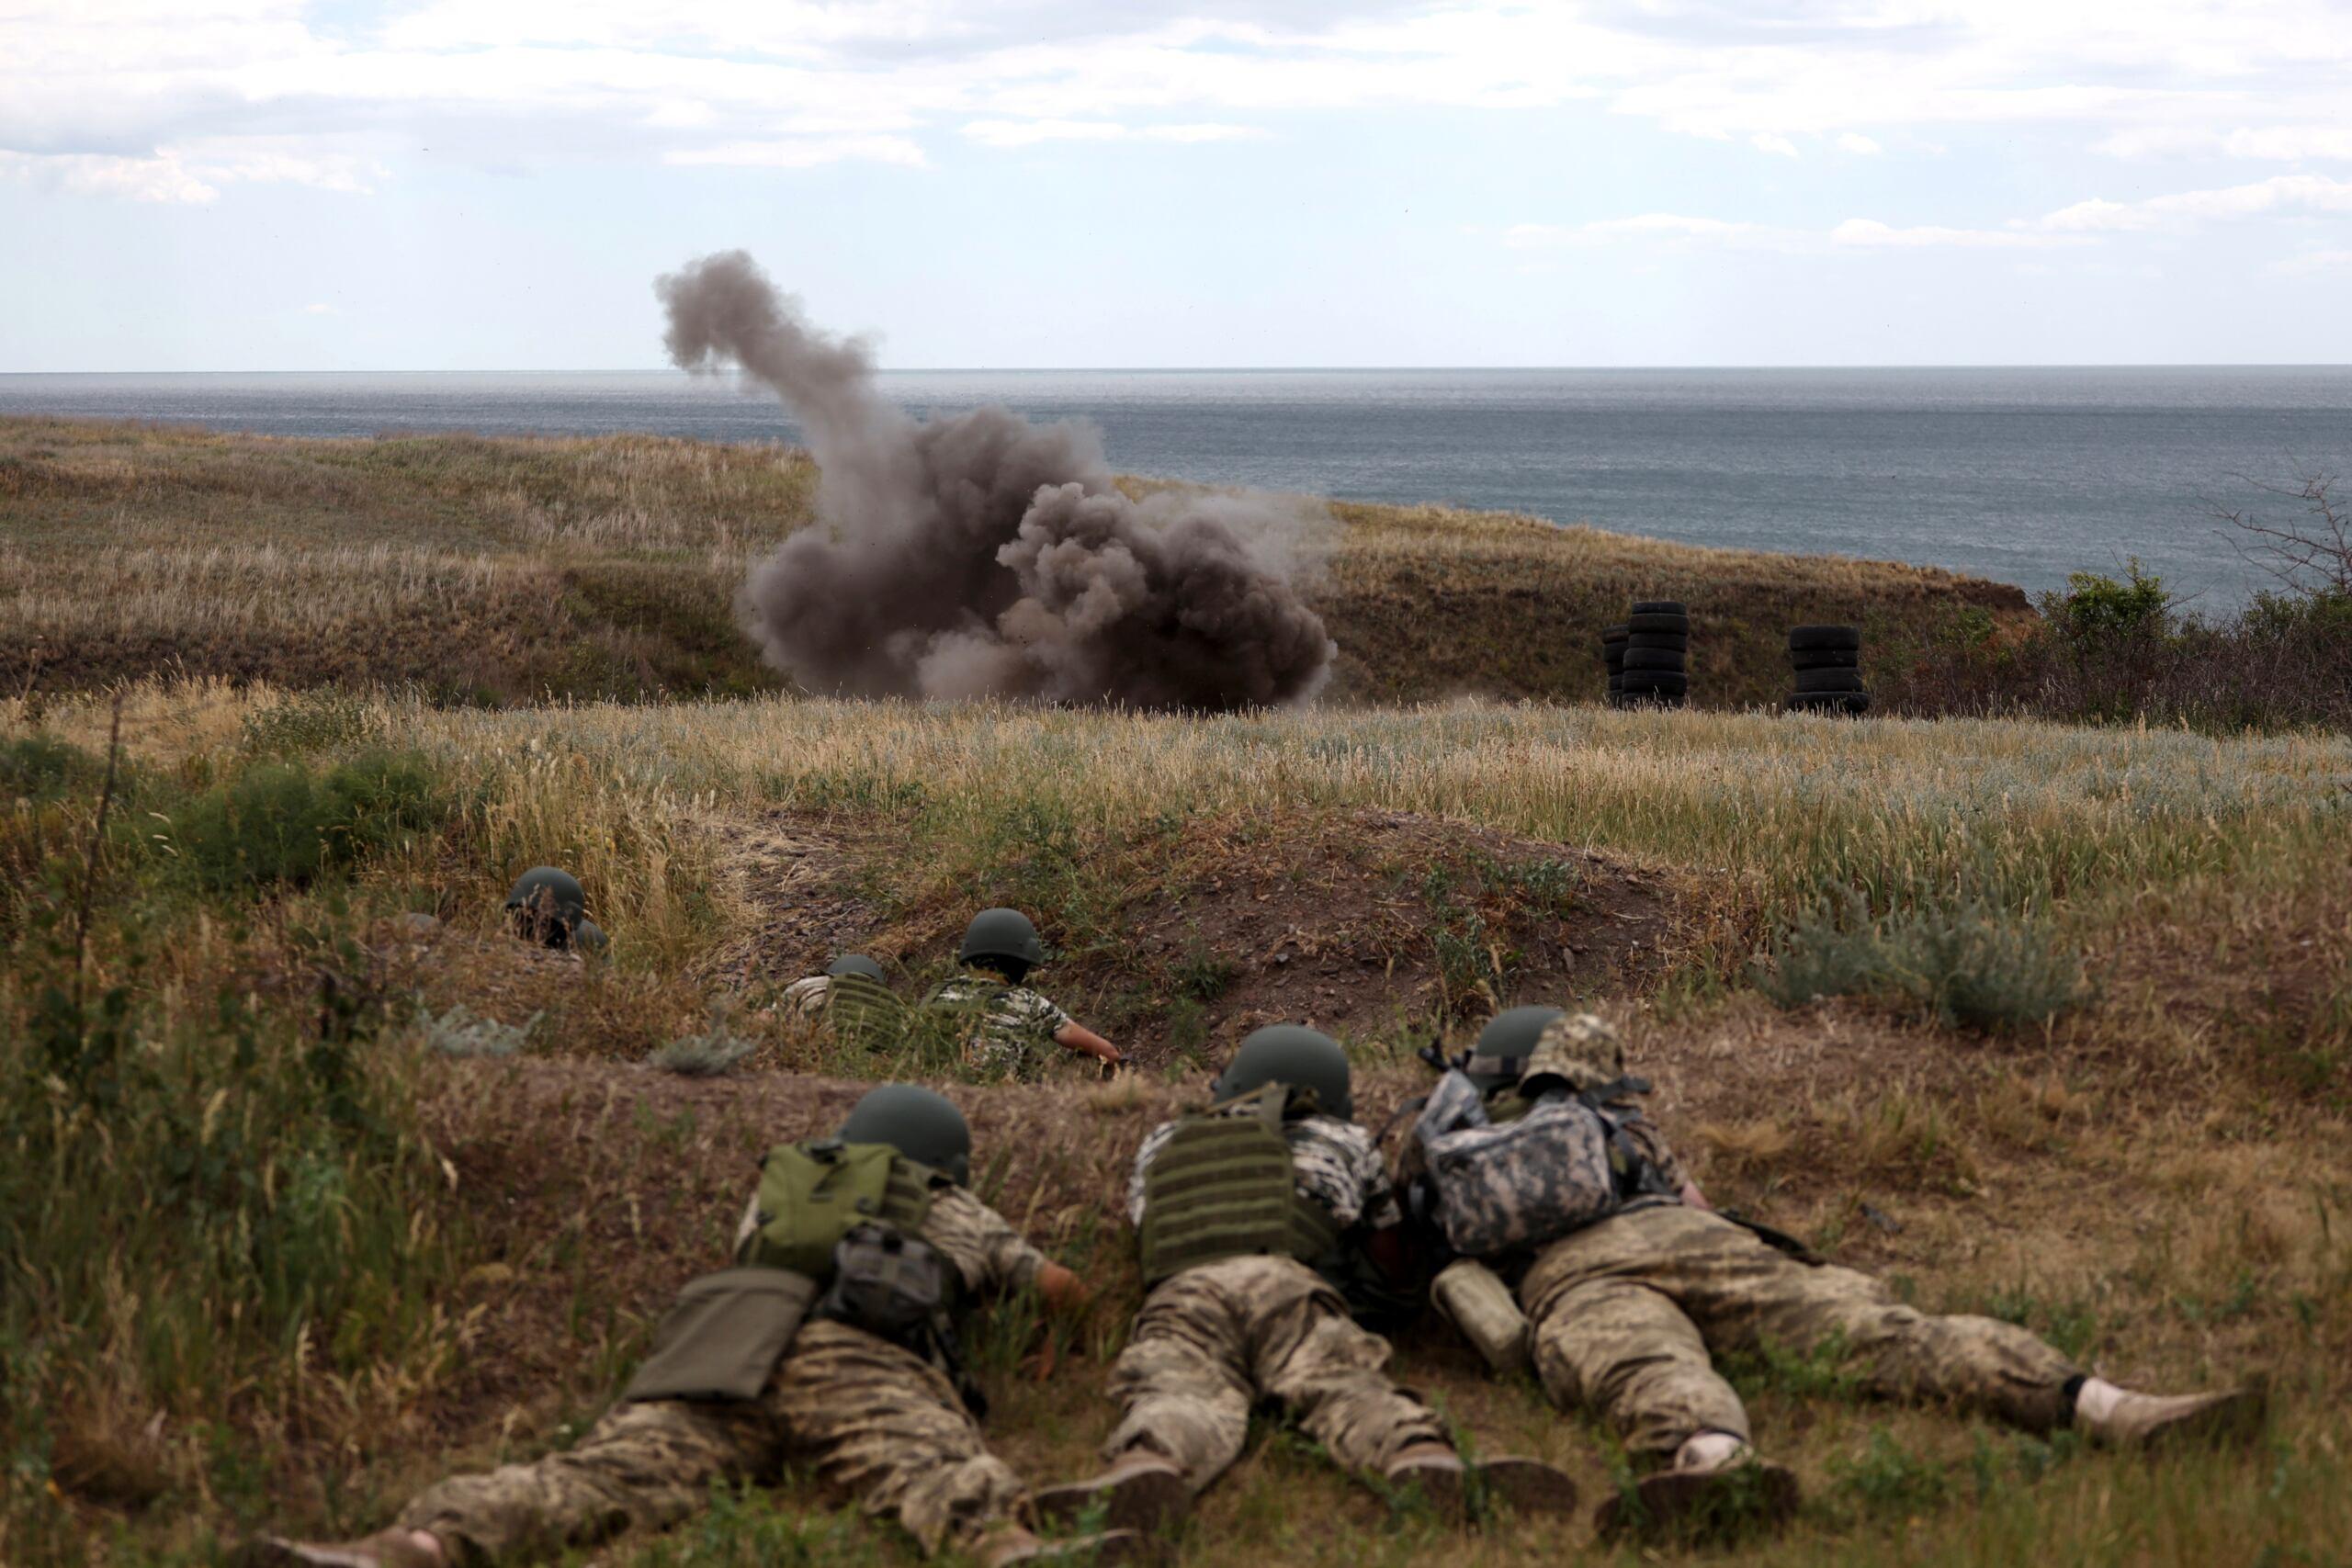 Servicemen of the 126th Separate Territorial Brigade of the Armed Forces of Ukraine take part in military exercises in Odessa region on June 22, 2022, amid Russia's military invasion launched on Ukraine. (Photo by Oleksandr GIMANOV / AFP)